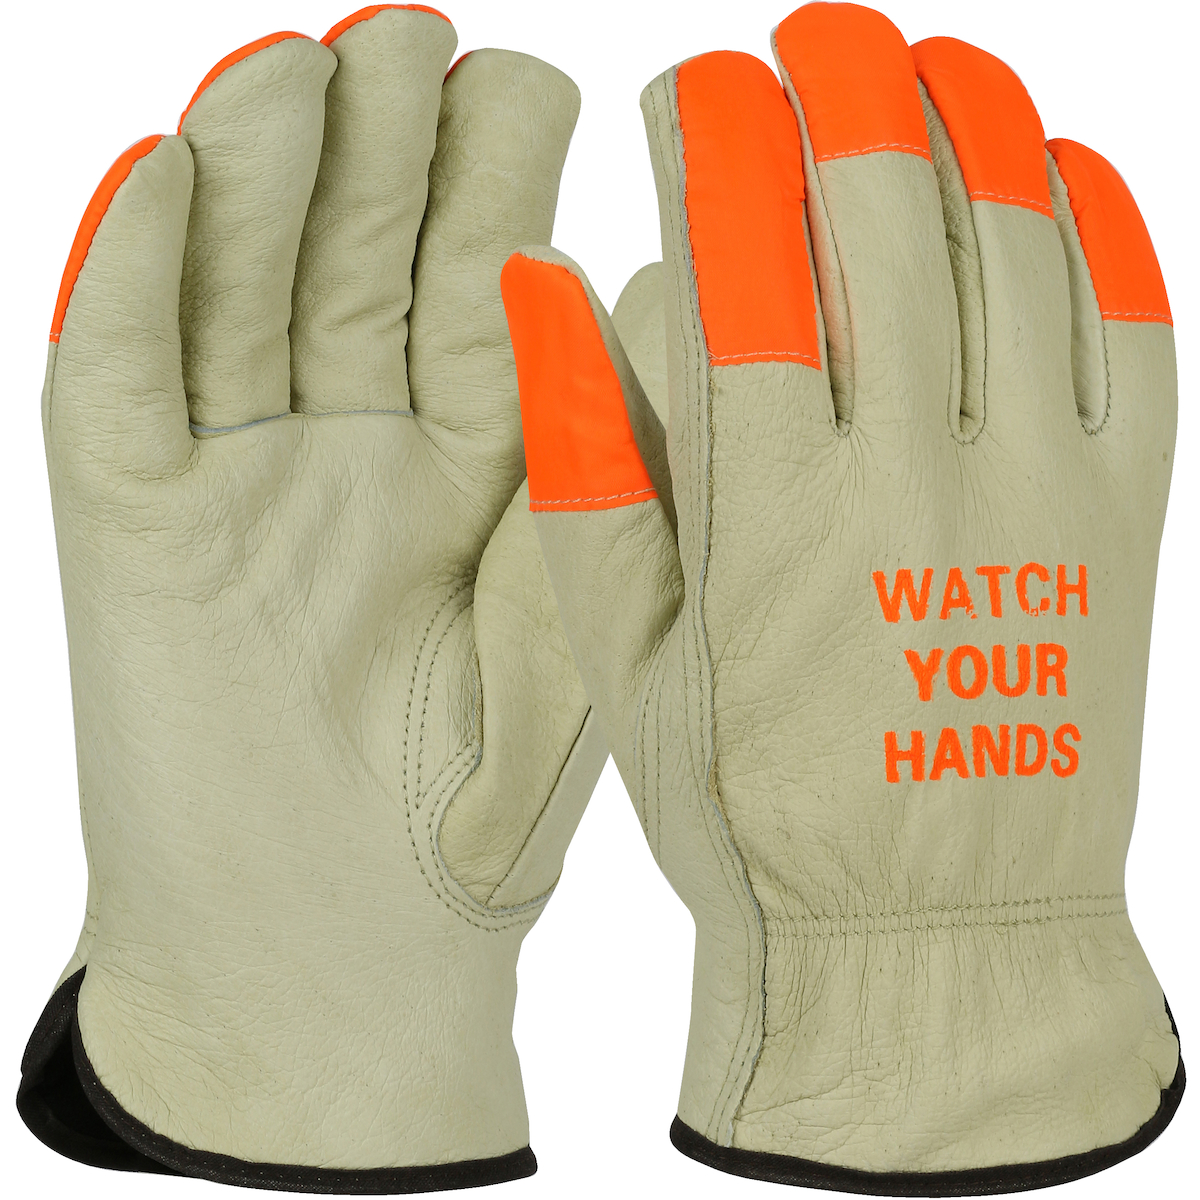 THERMAL PIGSKIN DRIVER WATCH YOUR HANDS - Insulated Gloves